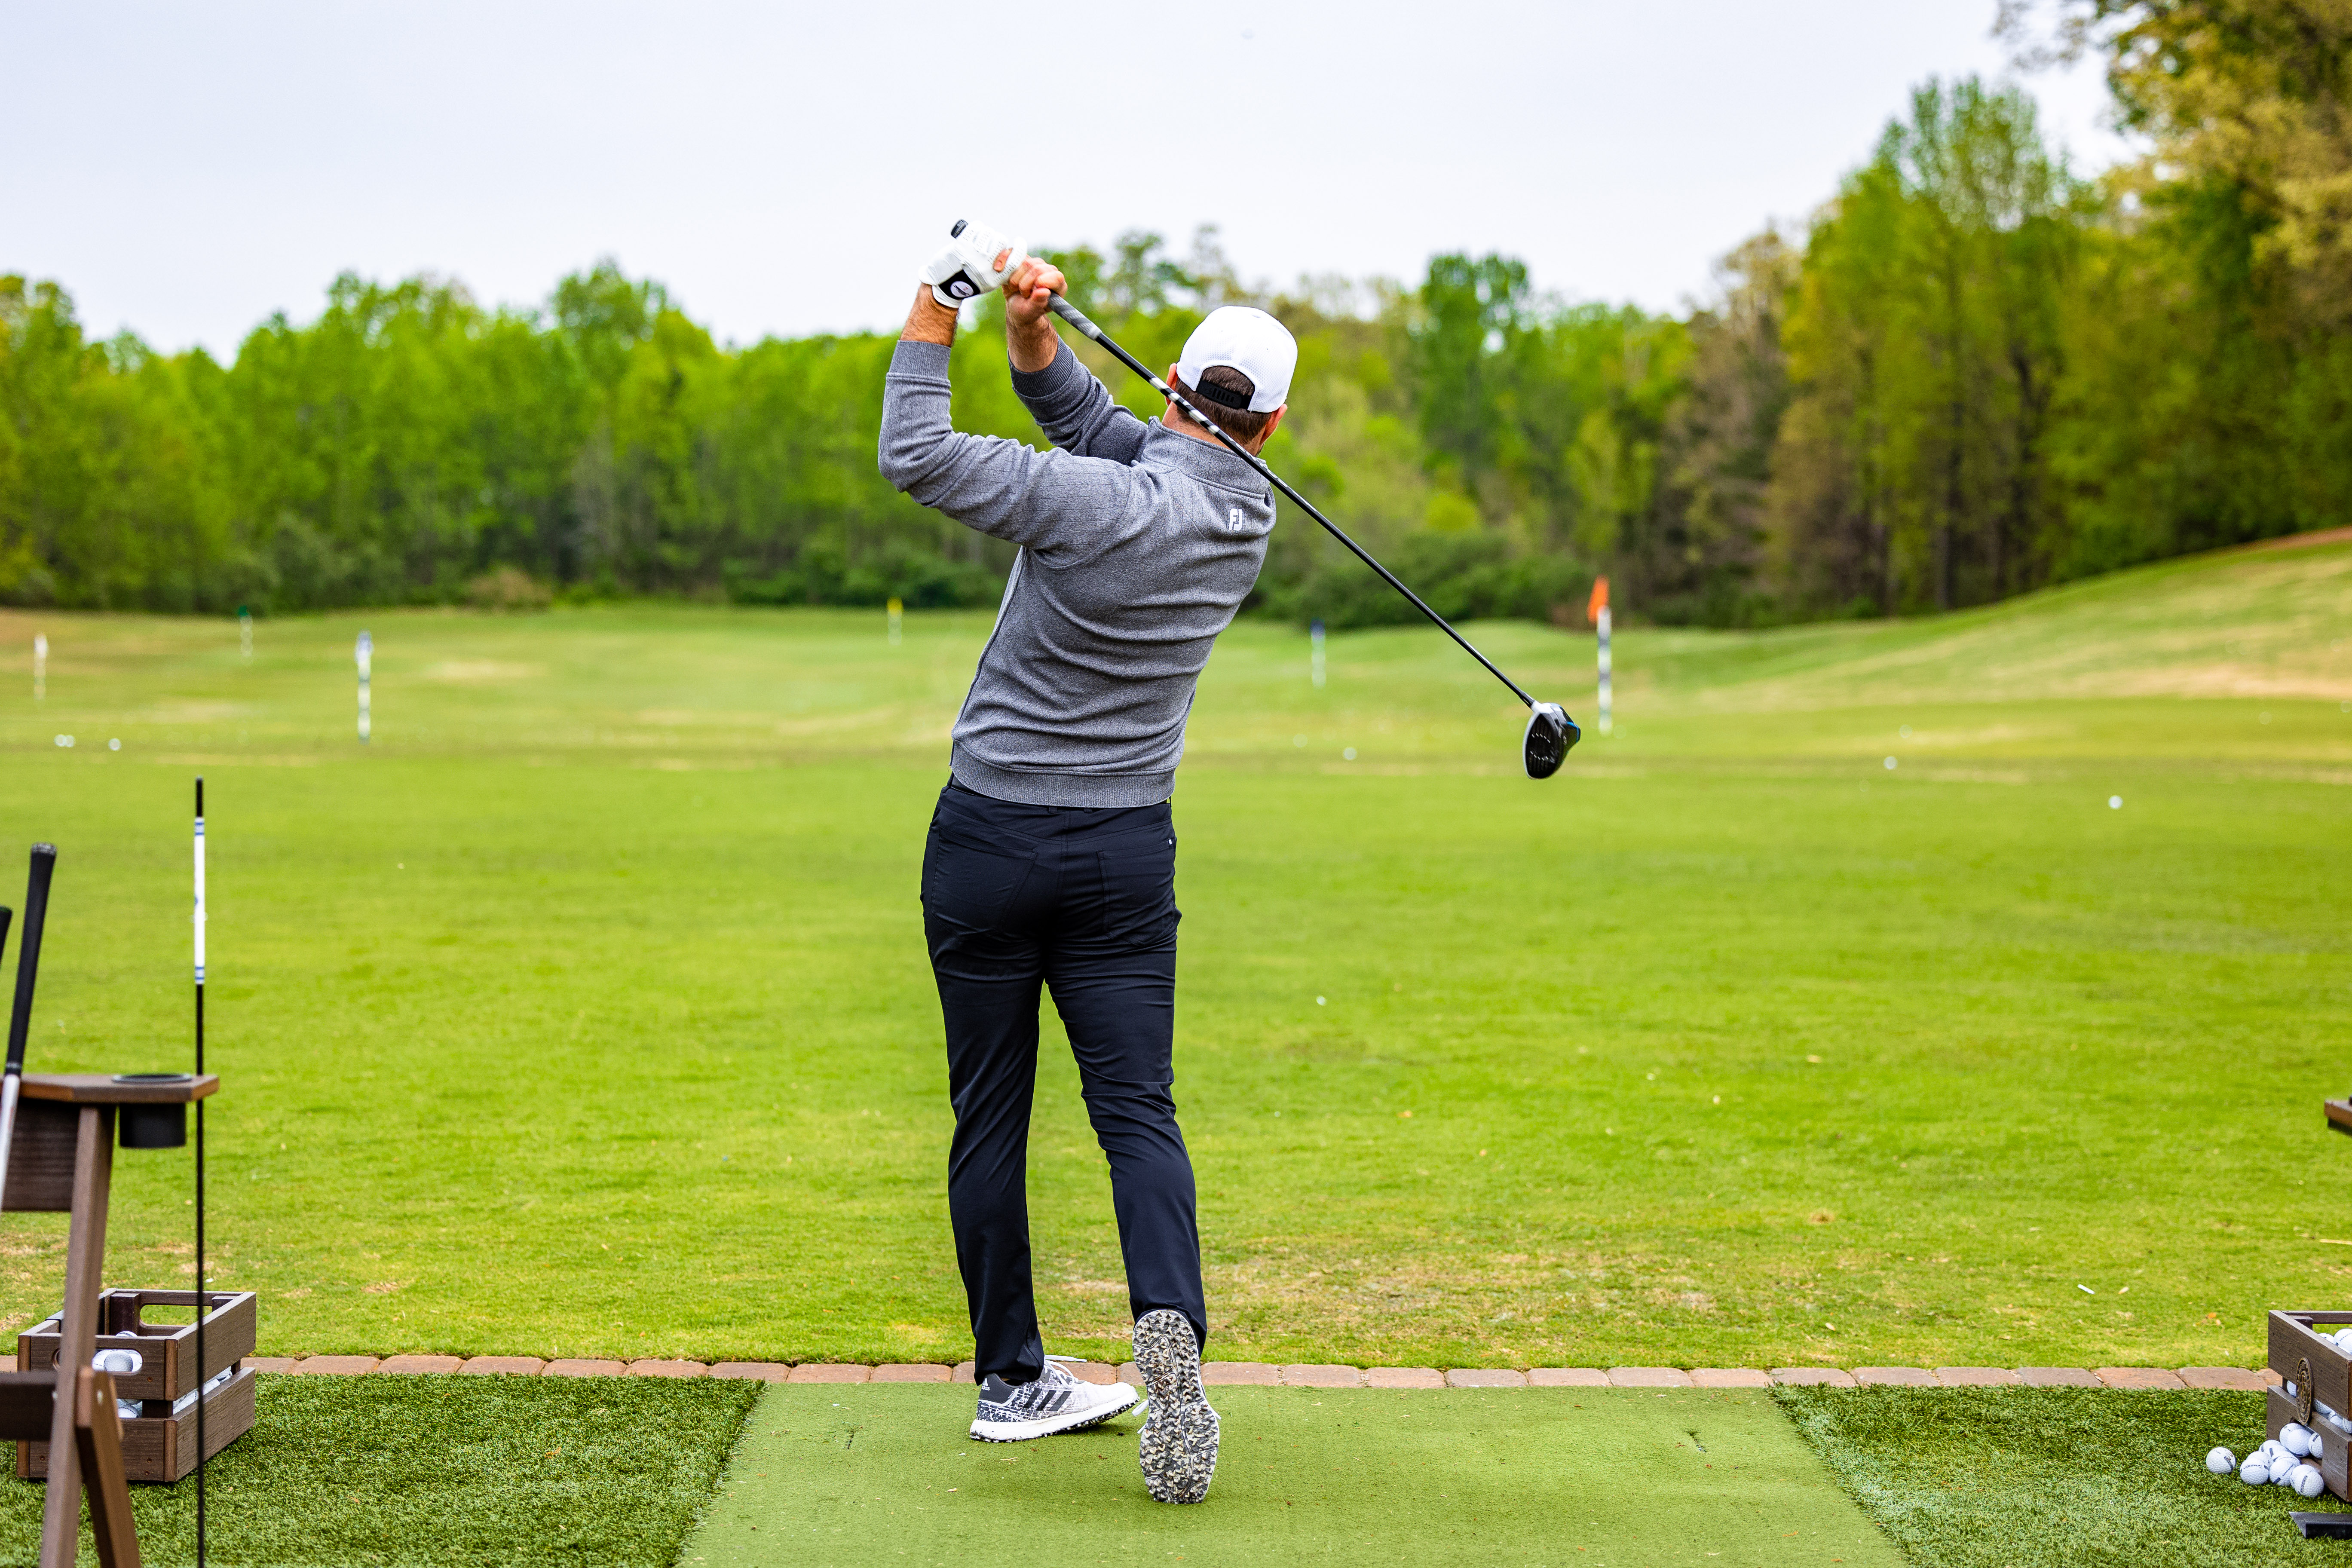 a person pictured from the back in full swing golf pose on golf course